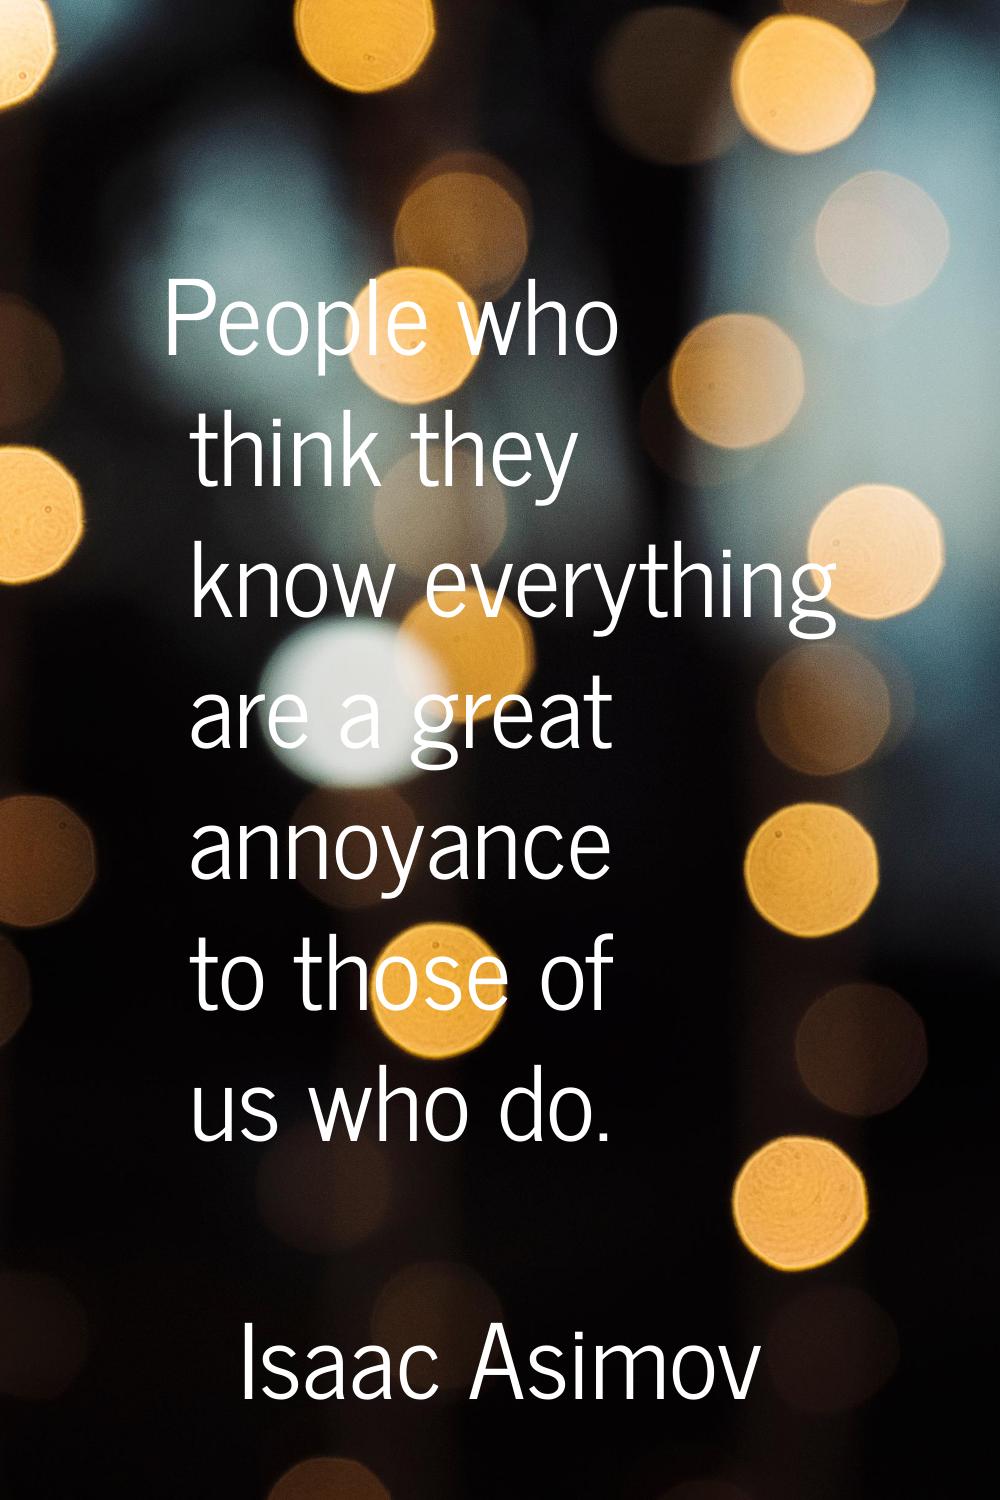 People who think they know everything are a great annoyance to those of us who do.